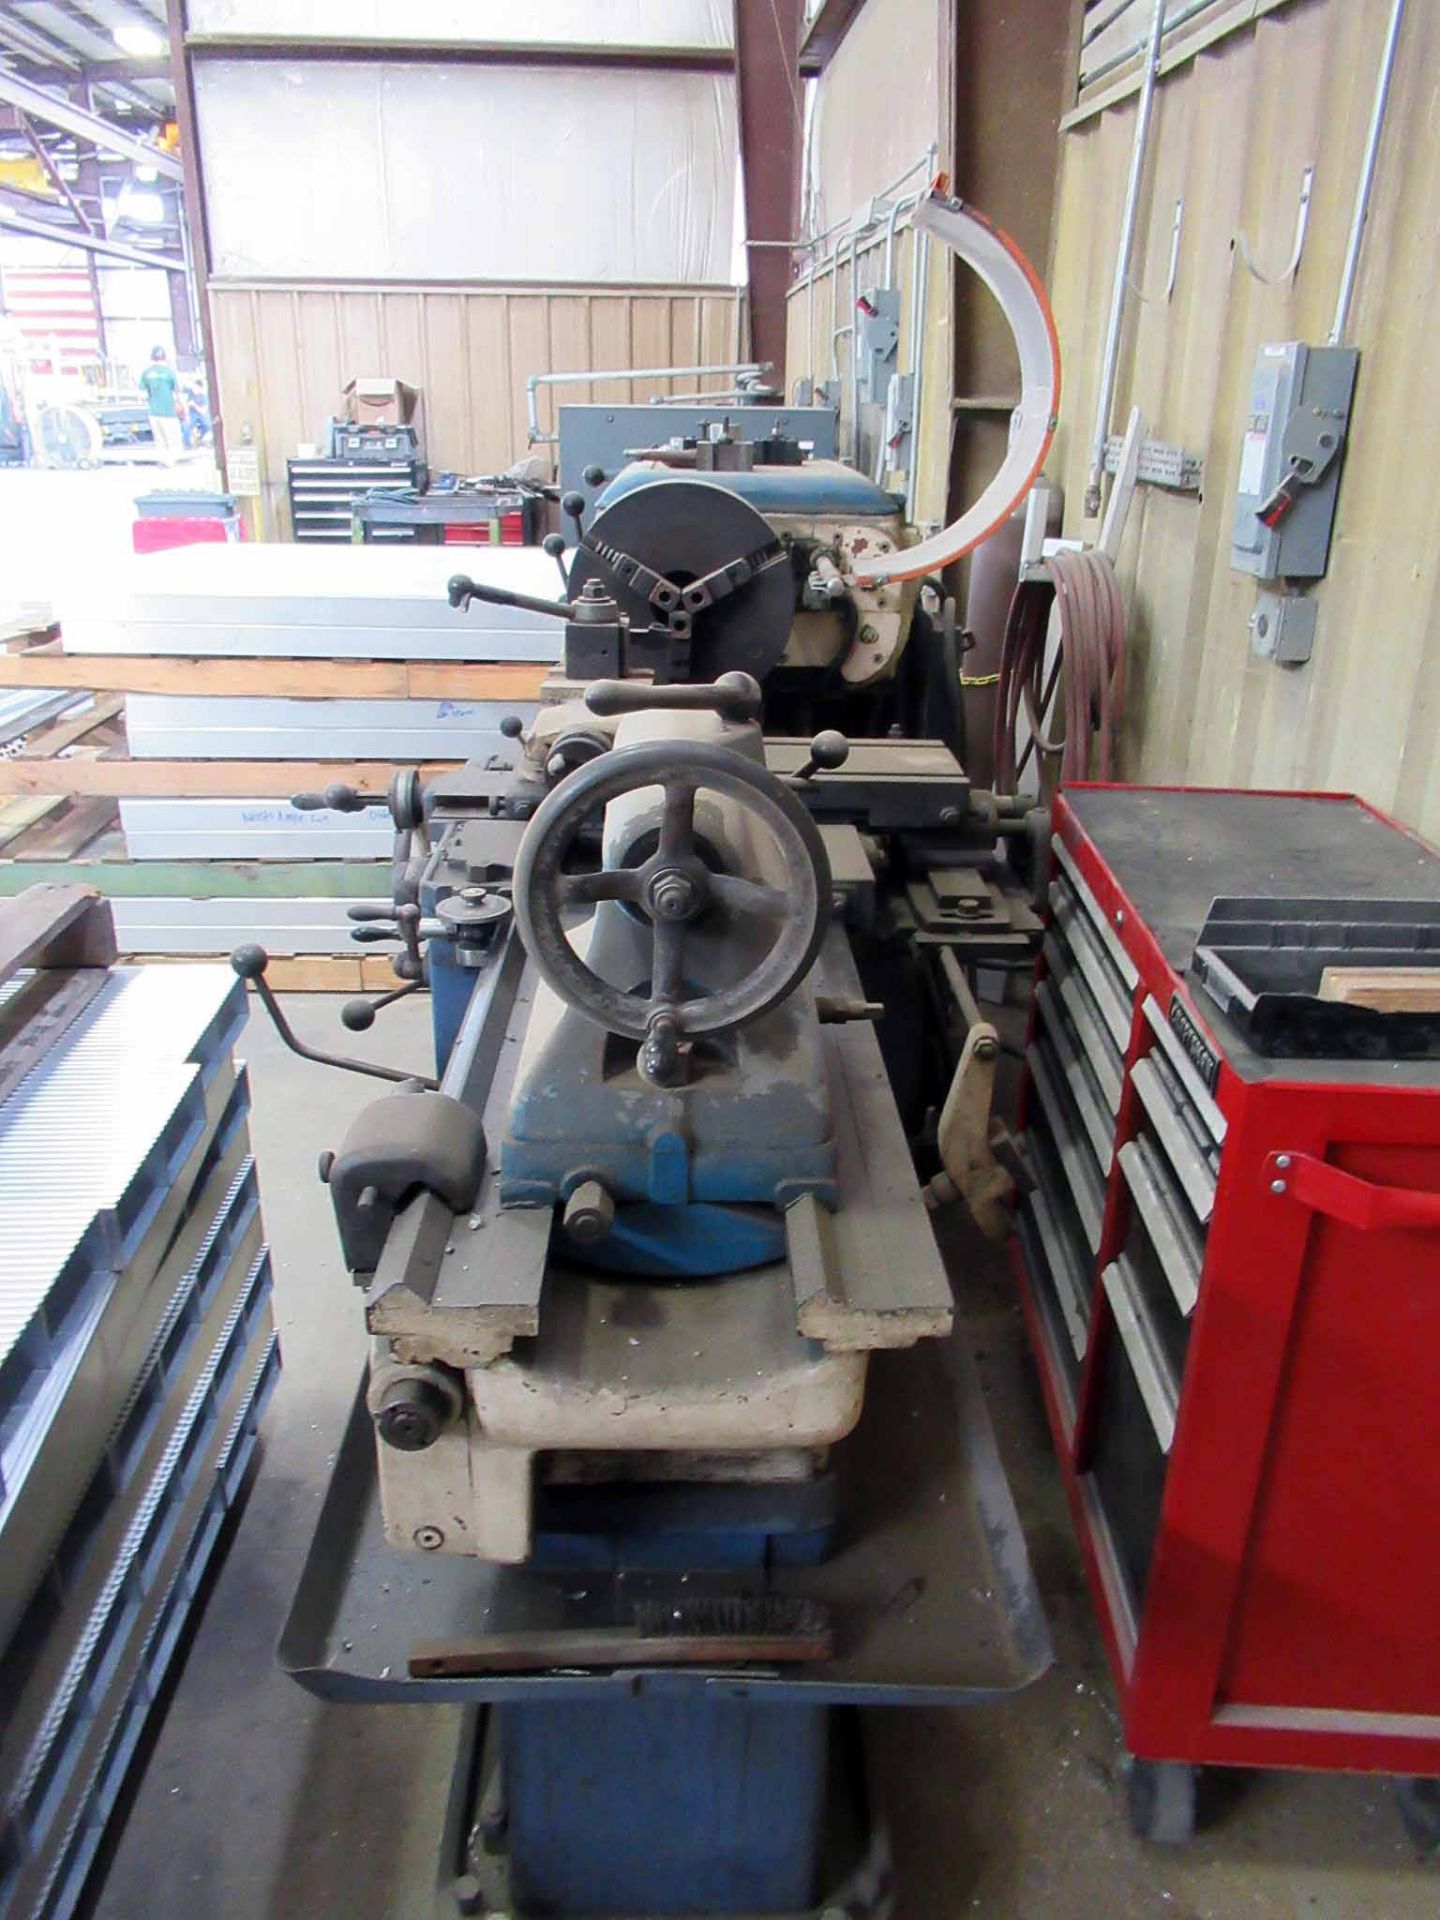 ENGINE LATHE, KOPINGS 20” X 40” MDL. S10B, 2-3/4” spdl. bore, taper attach., 15” dia. 3-jaw chuck, - Image 3 of 4